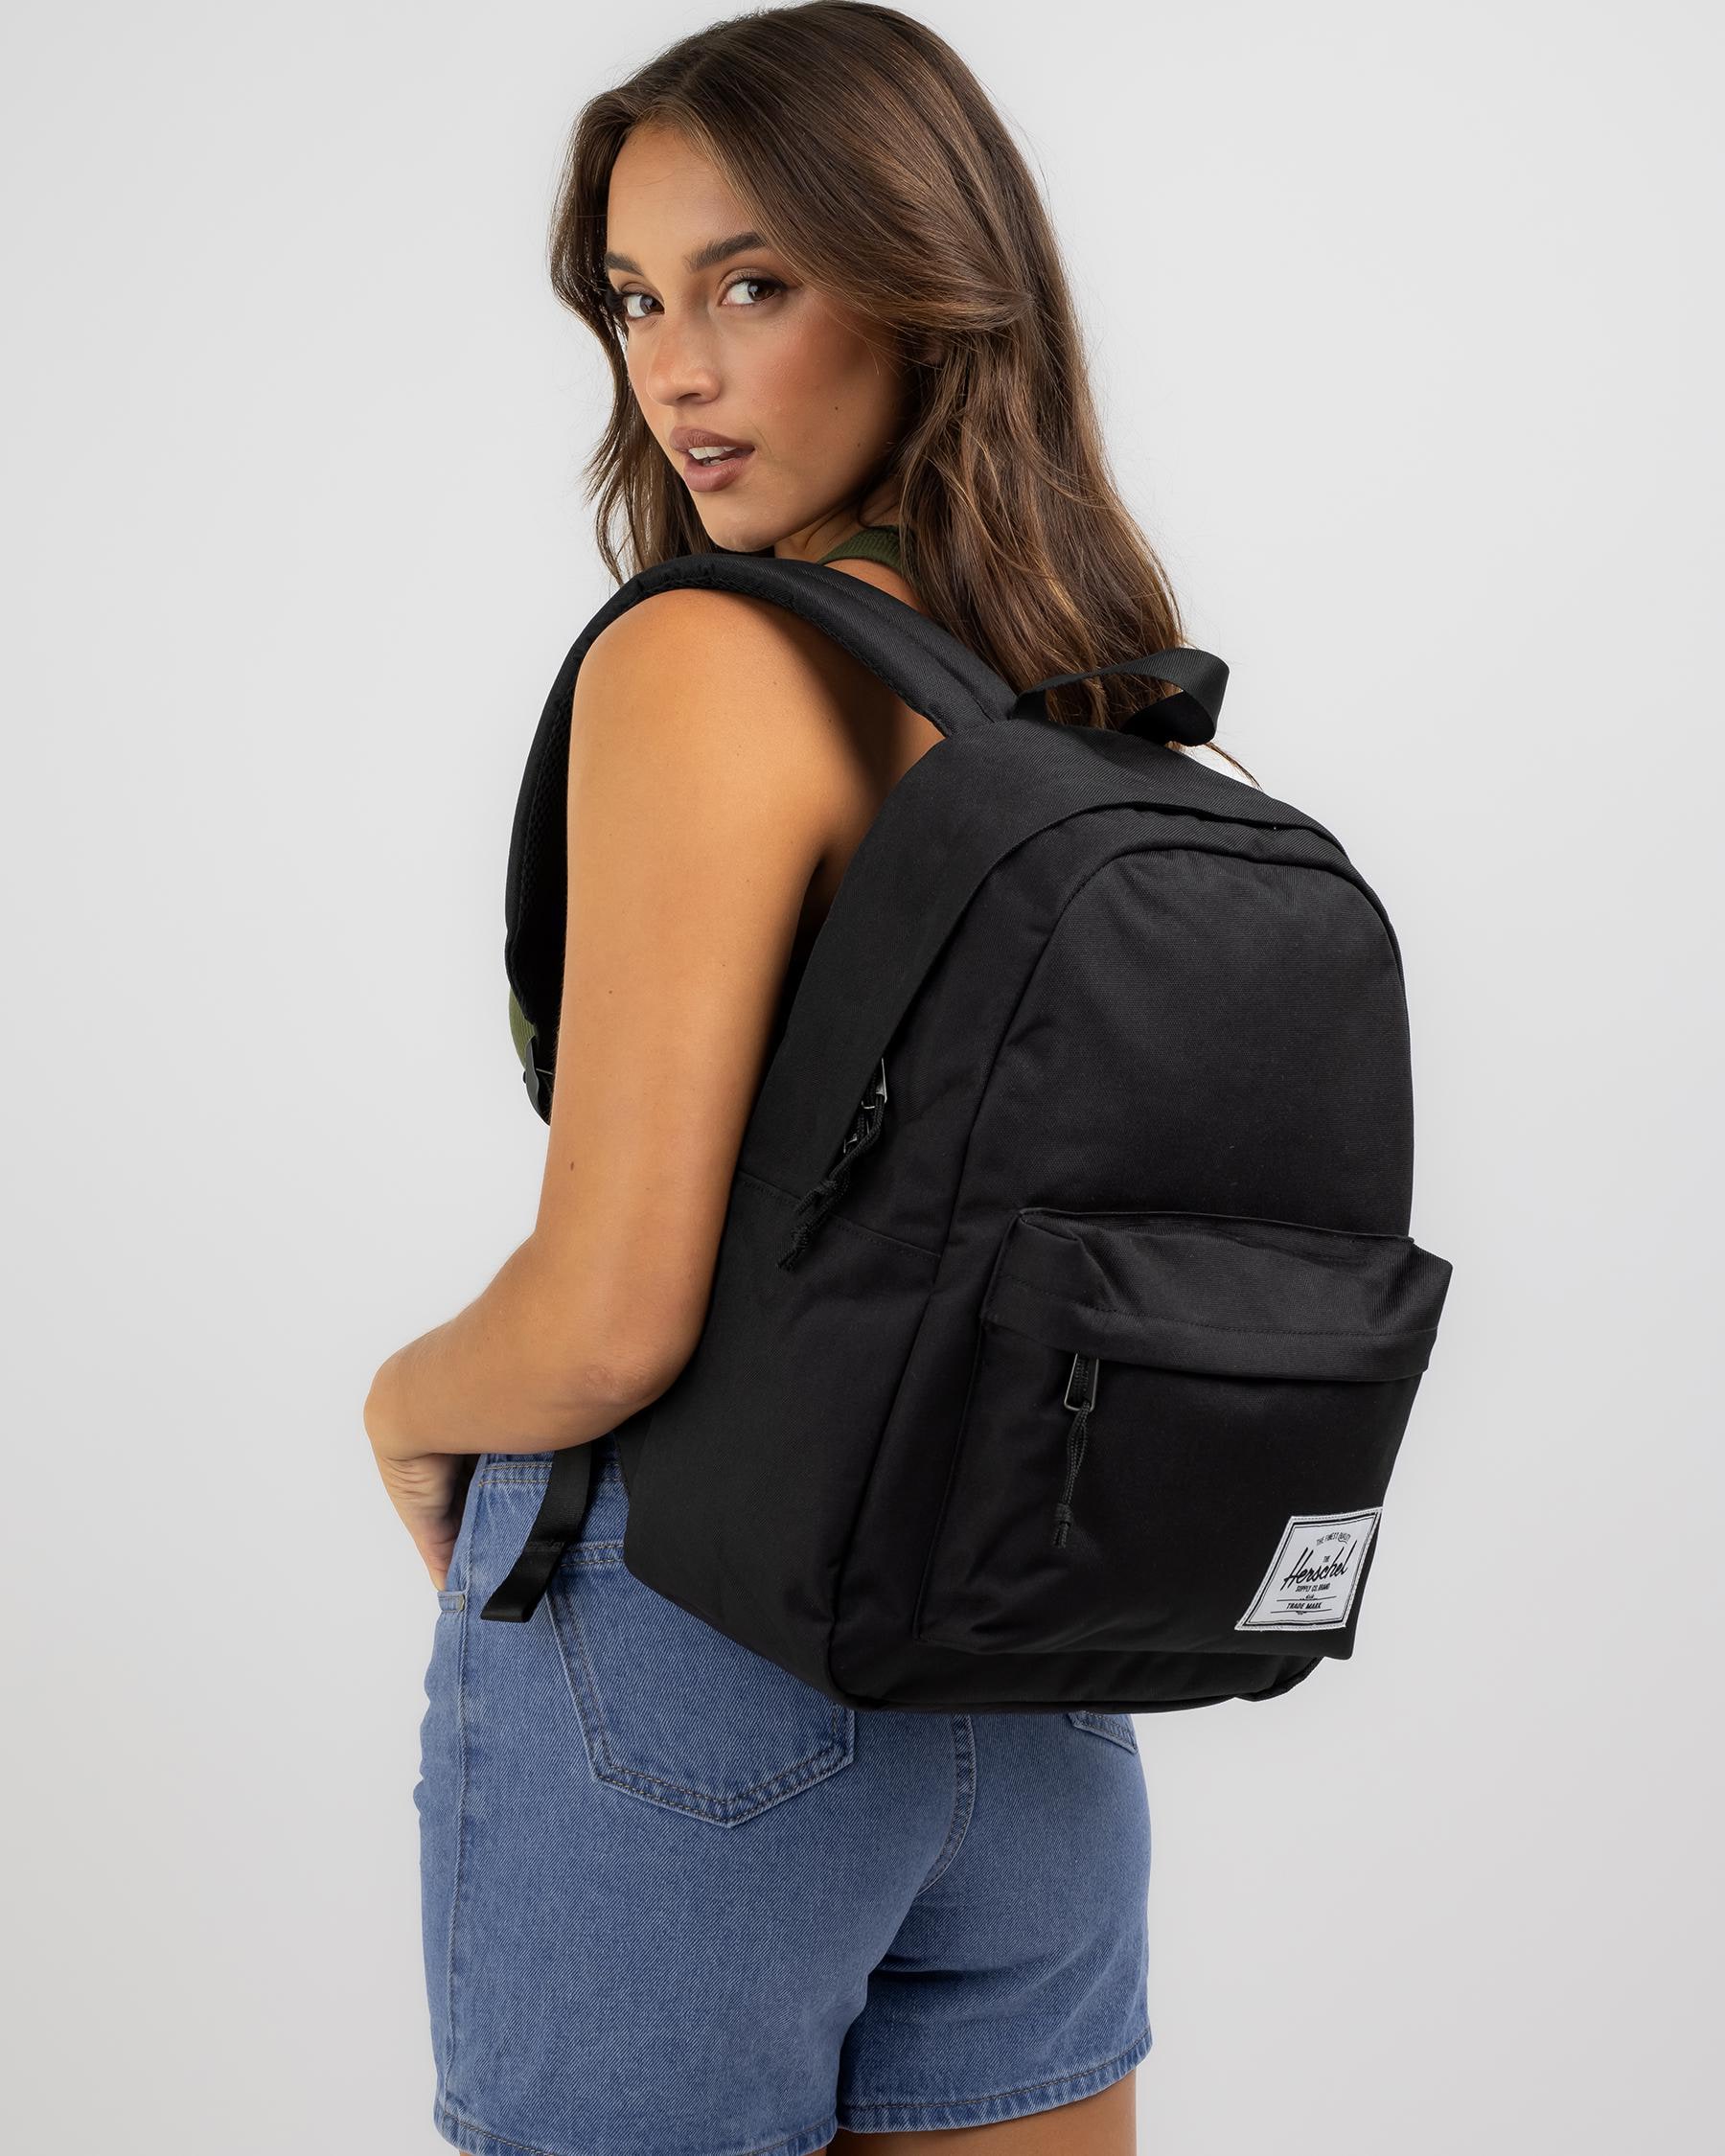 Herschel Classic Backpack In Black - Fast Shipping & Easy Returns ...